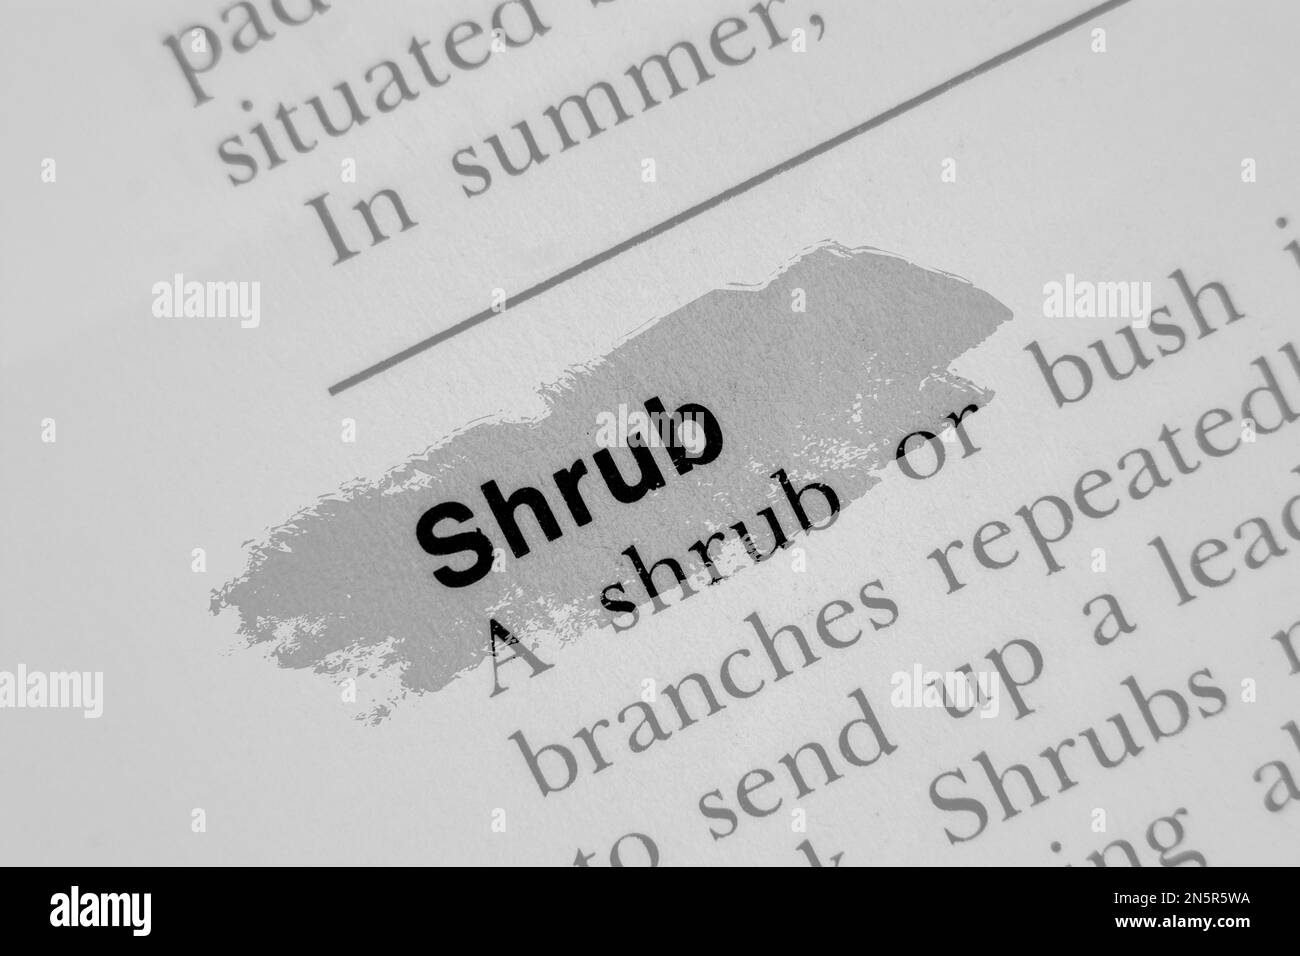 SHRUB in English vocabulary language word with reference and encyclopaedia meaning opaque Stock Photo